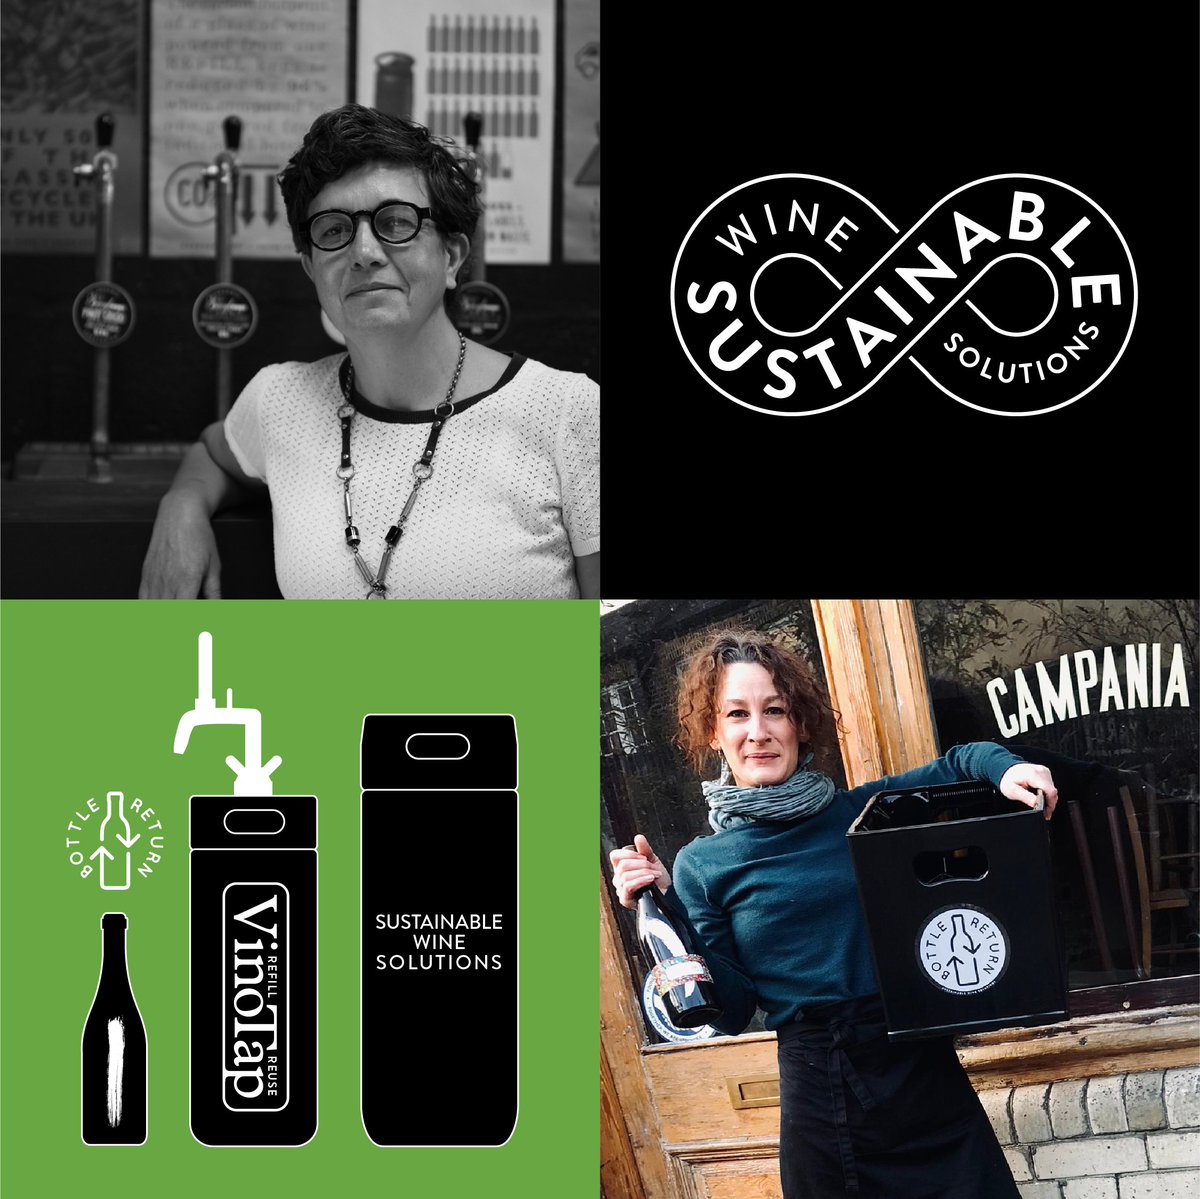 Circularity in action: is a new wine supply chain possible? Fri 6 May 2pm - Muriel Chatel, founder of #Sustainable Wine Solutions @sws_wine, will discuss her business model which has the potential to disrupt the way wine is sold and distributed. #reduce #reuse #recycle #zerowaste